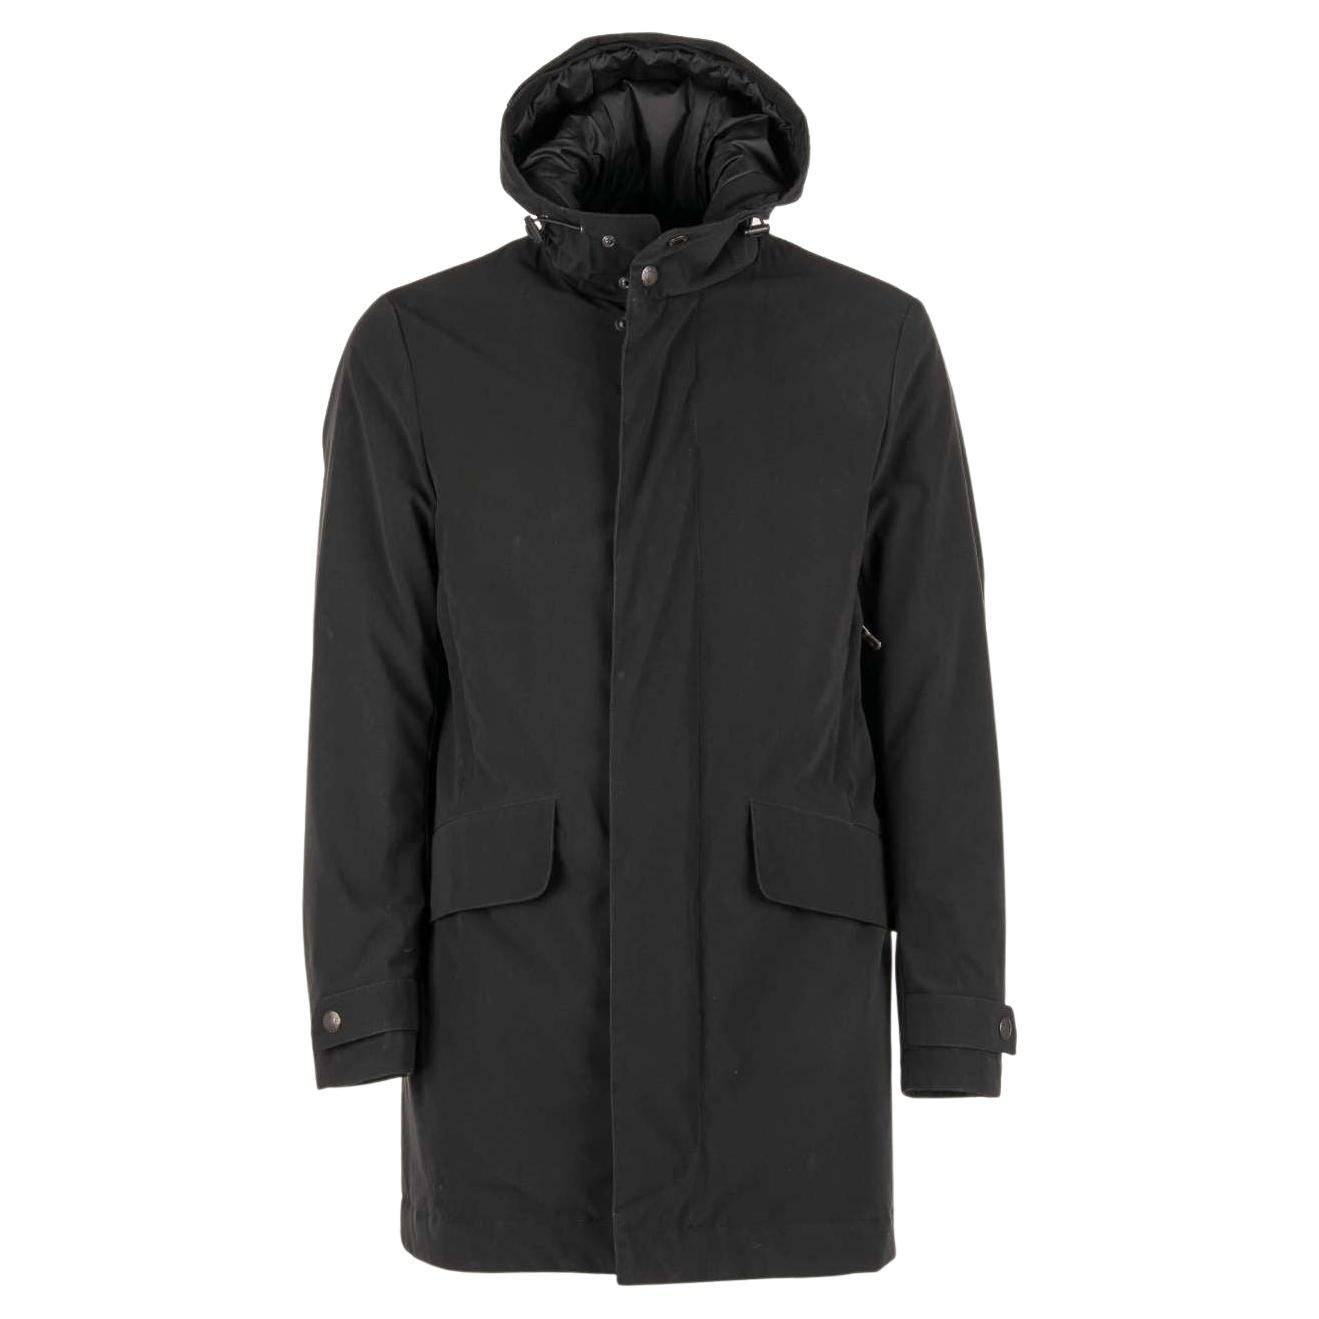 Dolce & Gabbana Classic Hooded Parka Jacket with Pockets and Logo Black 46 S For Sale